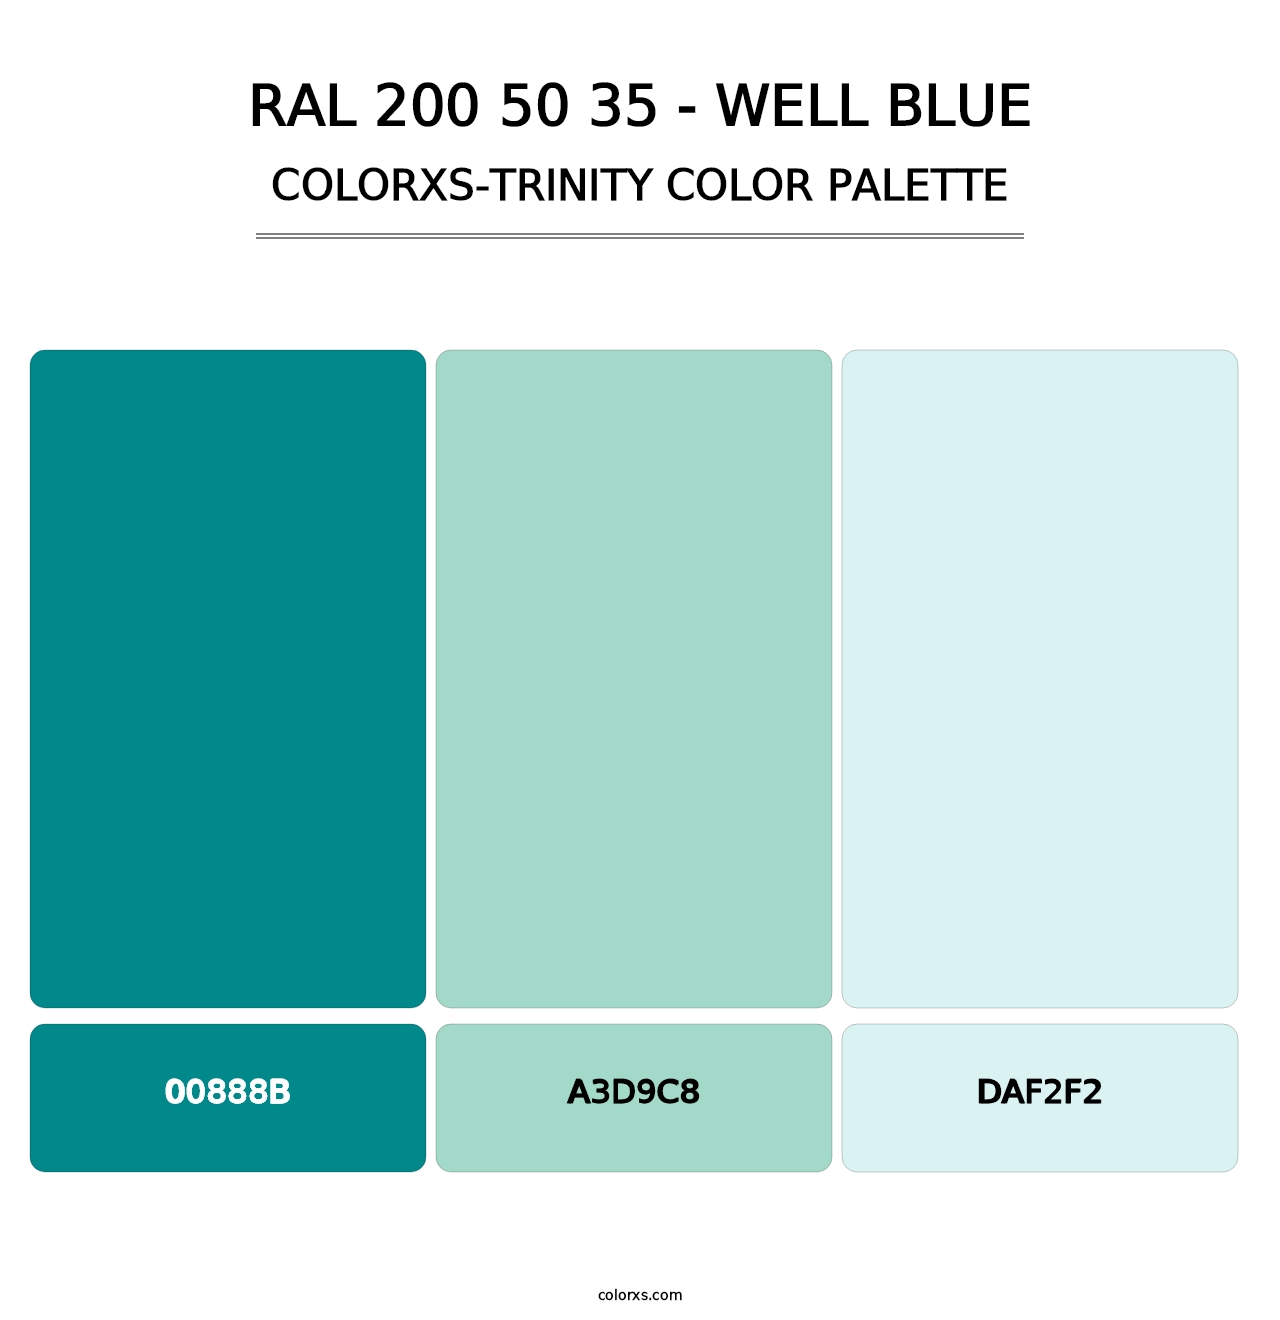 RAL 200 50 35 - Well Blue - Colorxs Trinity Palette